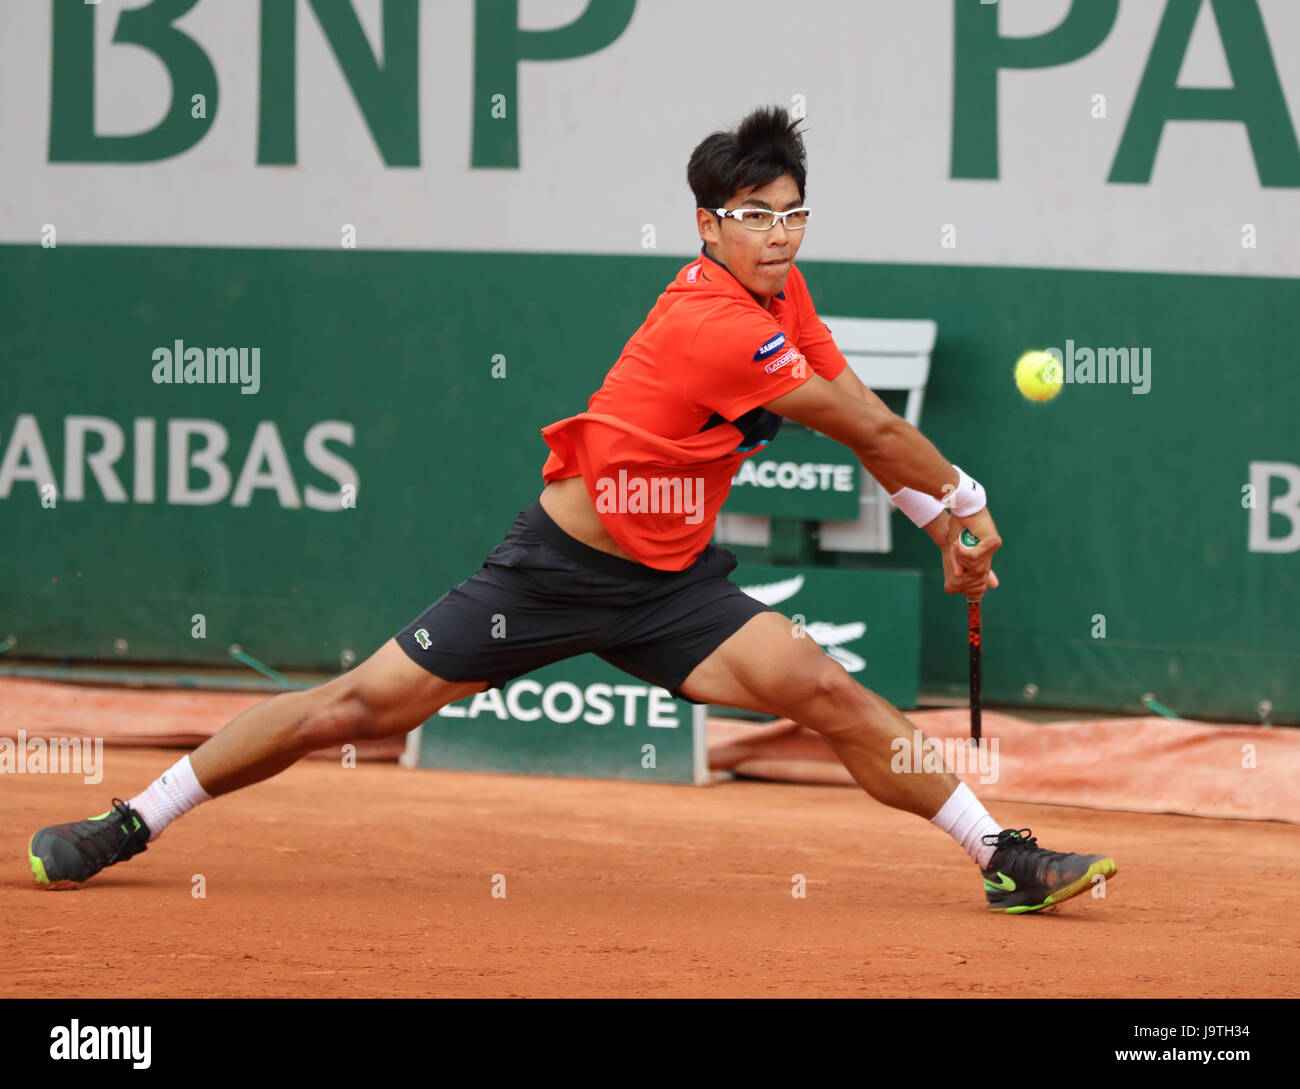 Paris, France. 03rd June, 2017. Korean tennis player Hyeon Chung is in  action during his 3rd round match at the ATP French Open in Roland Garros  Stadium vs Japanese tennis player Kei